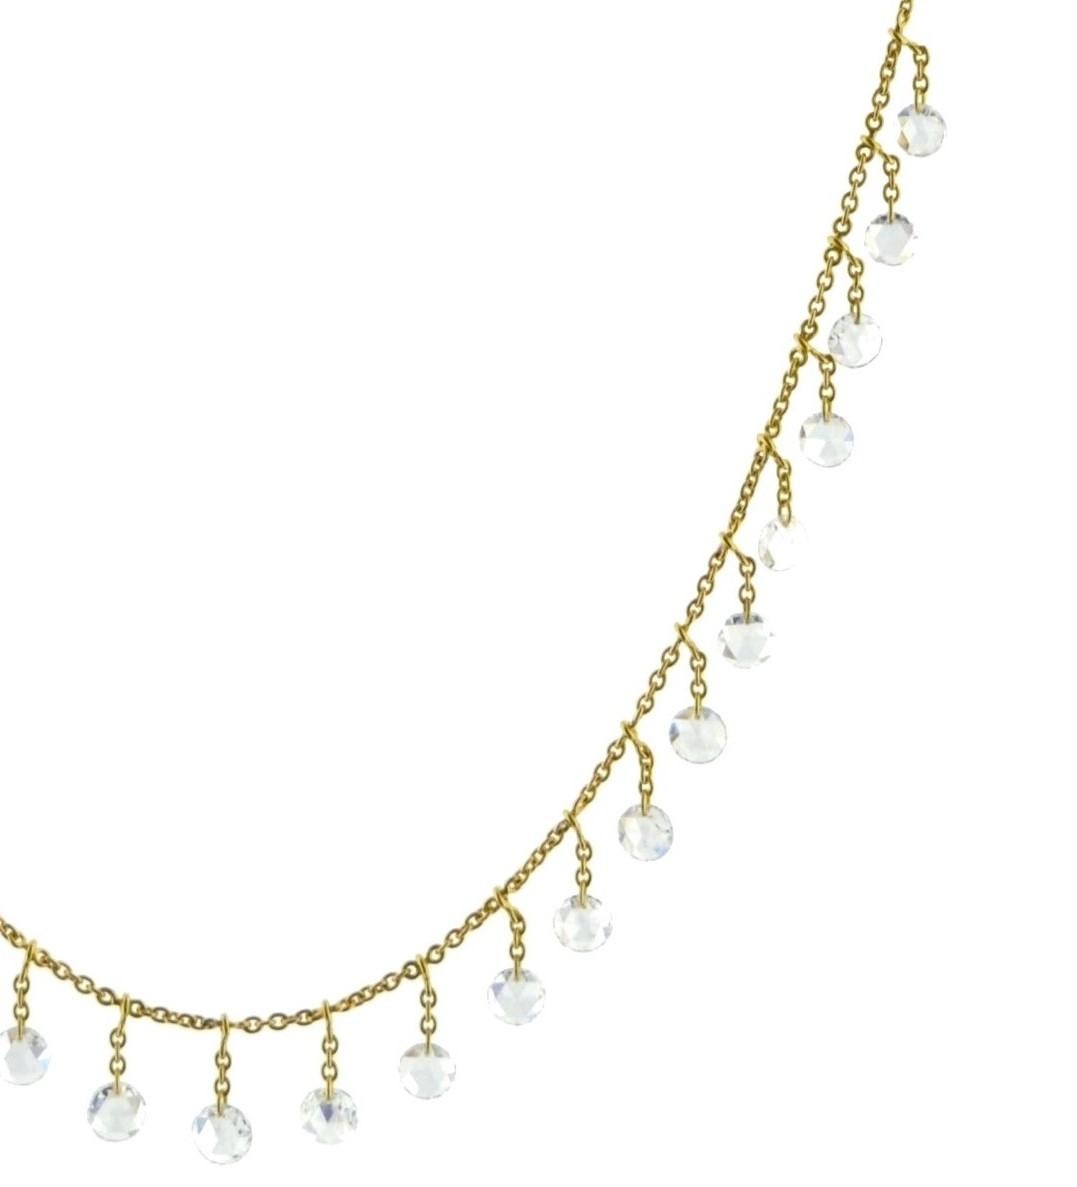 JR 2.37 Carat Diamond Rose Cut Dangling Necklace 18 Karat Yellow Gold In New Condition For Sale In Hong Kong, HK